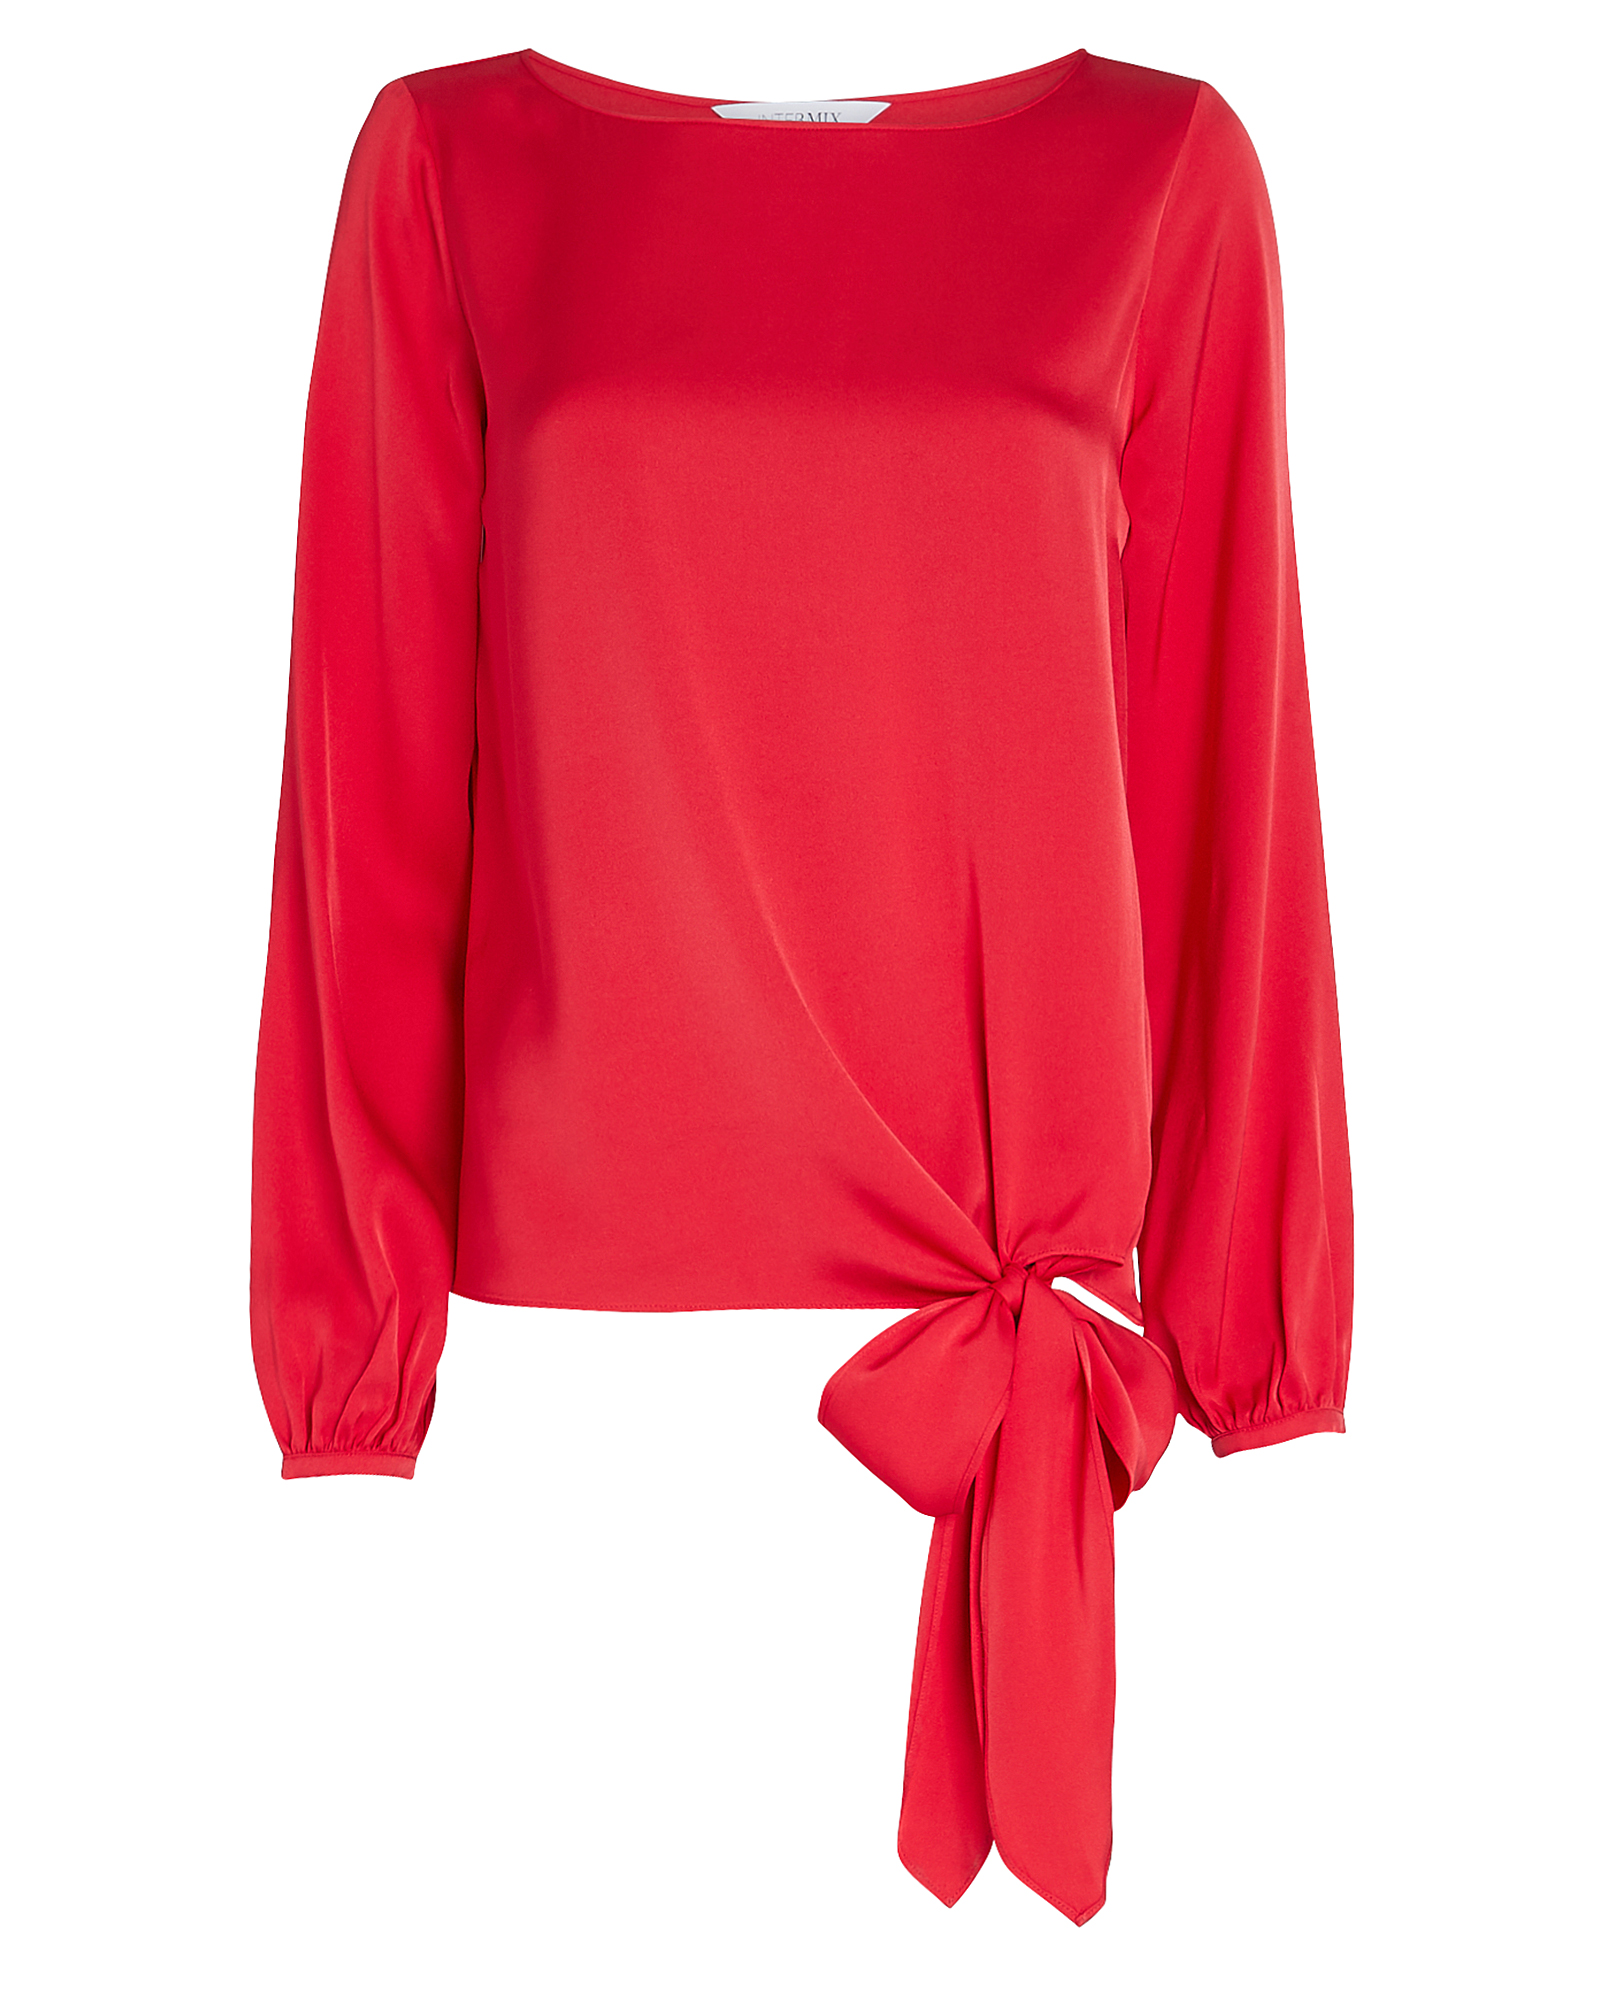 INTERMIX Private Label | Kristy Knotted Silk Blouse | INTERMIX®